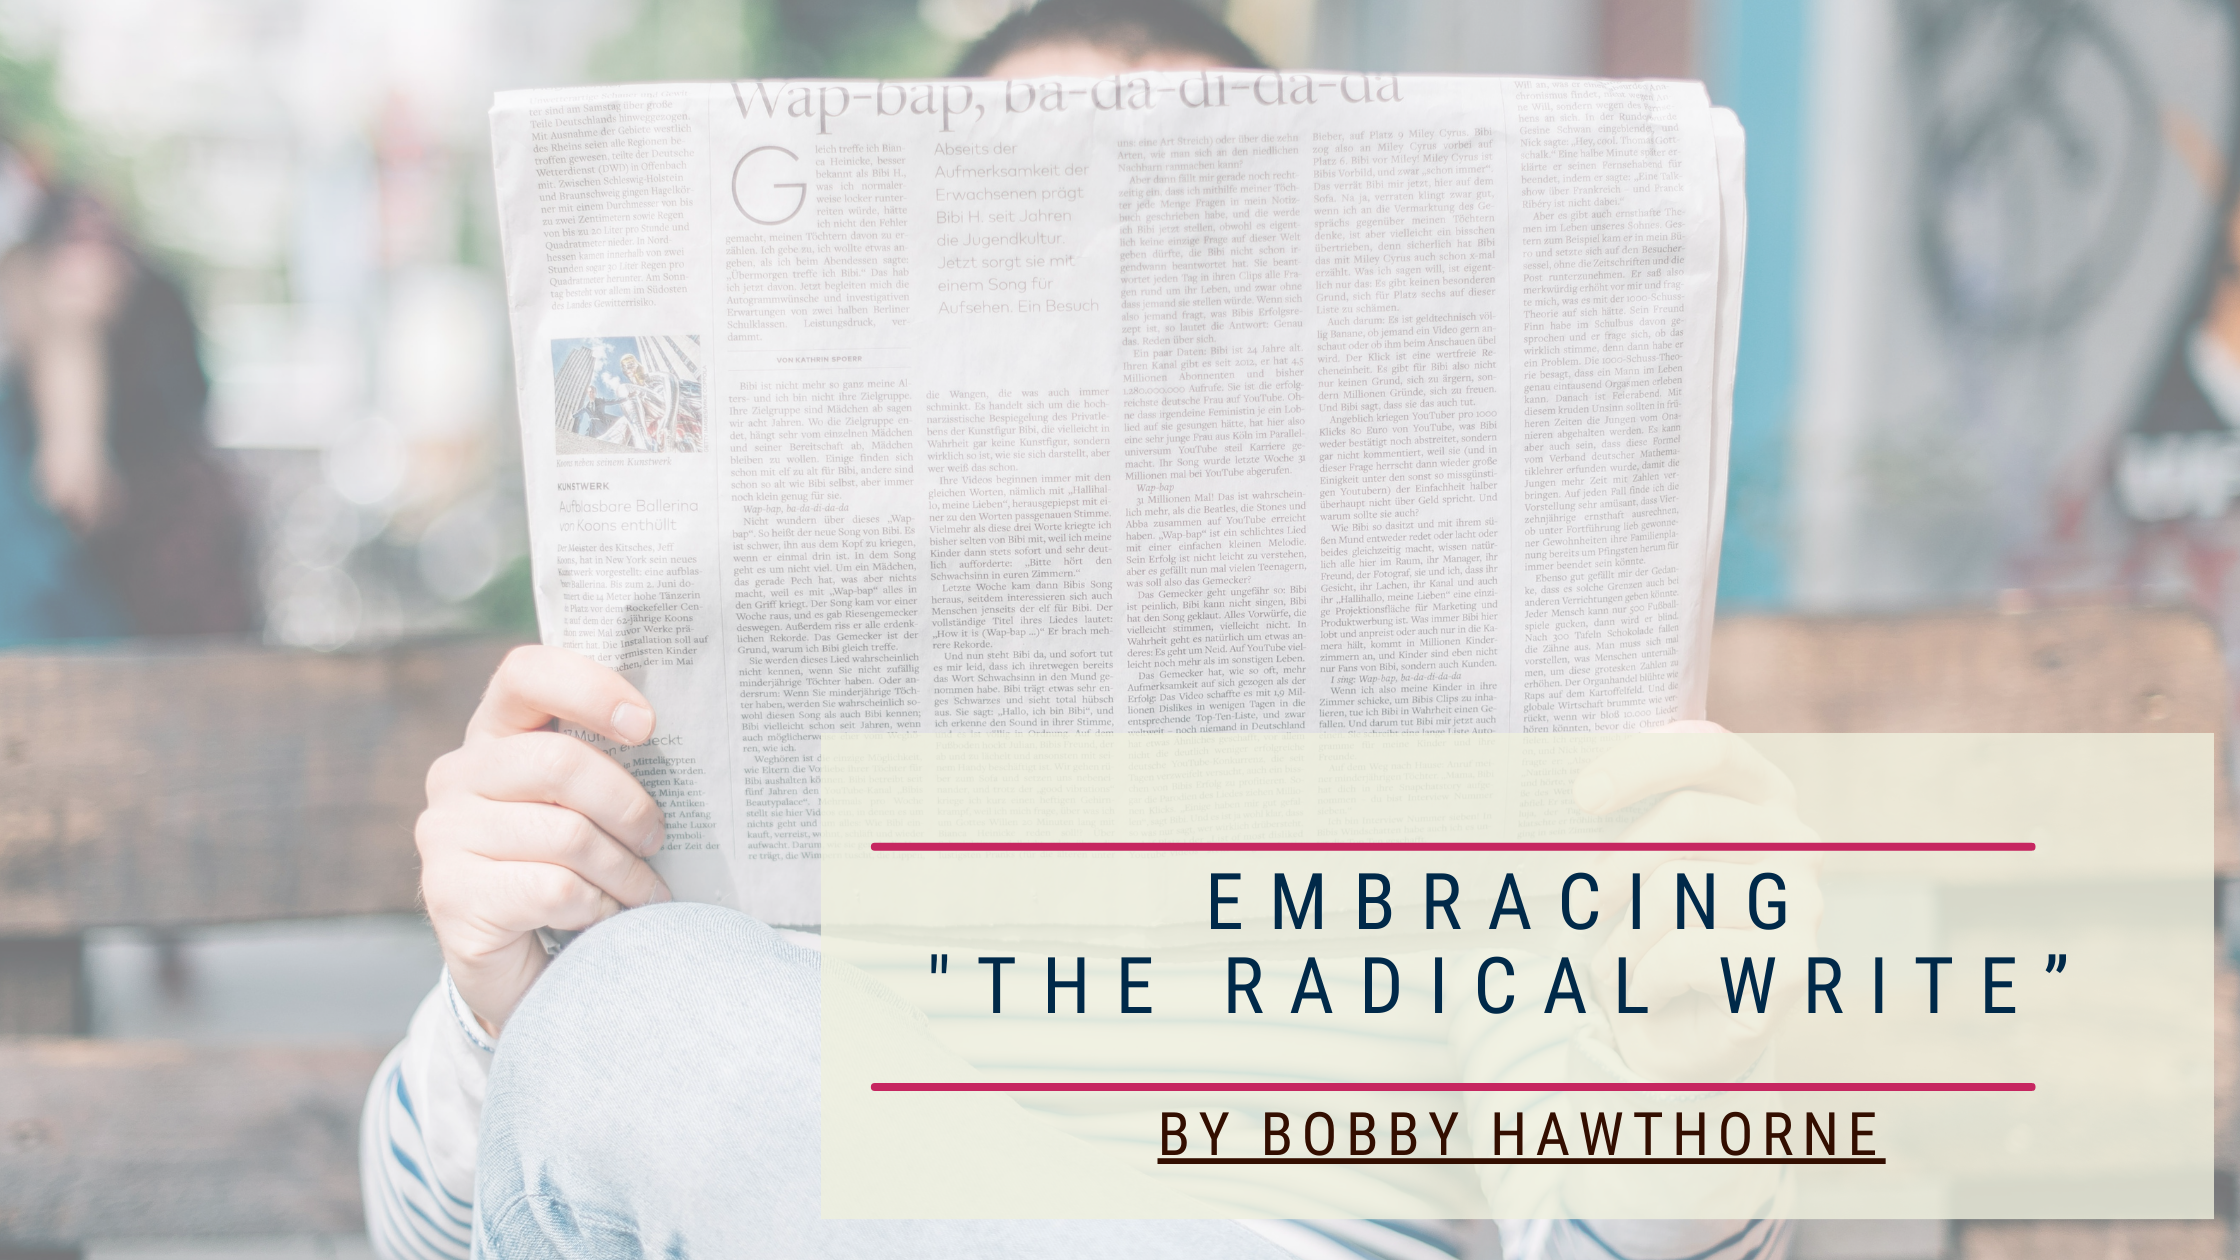 Unleashing Creativity in the Classroom: Embracing “The Radical Write” by Bobby Hawthorne